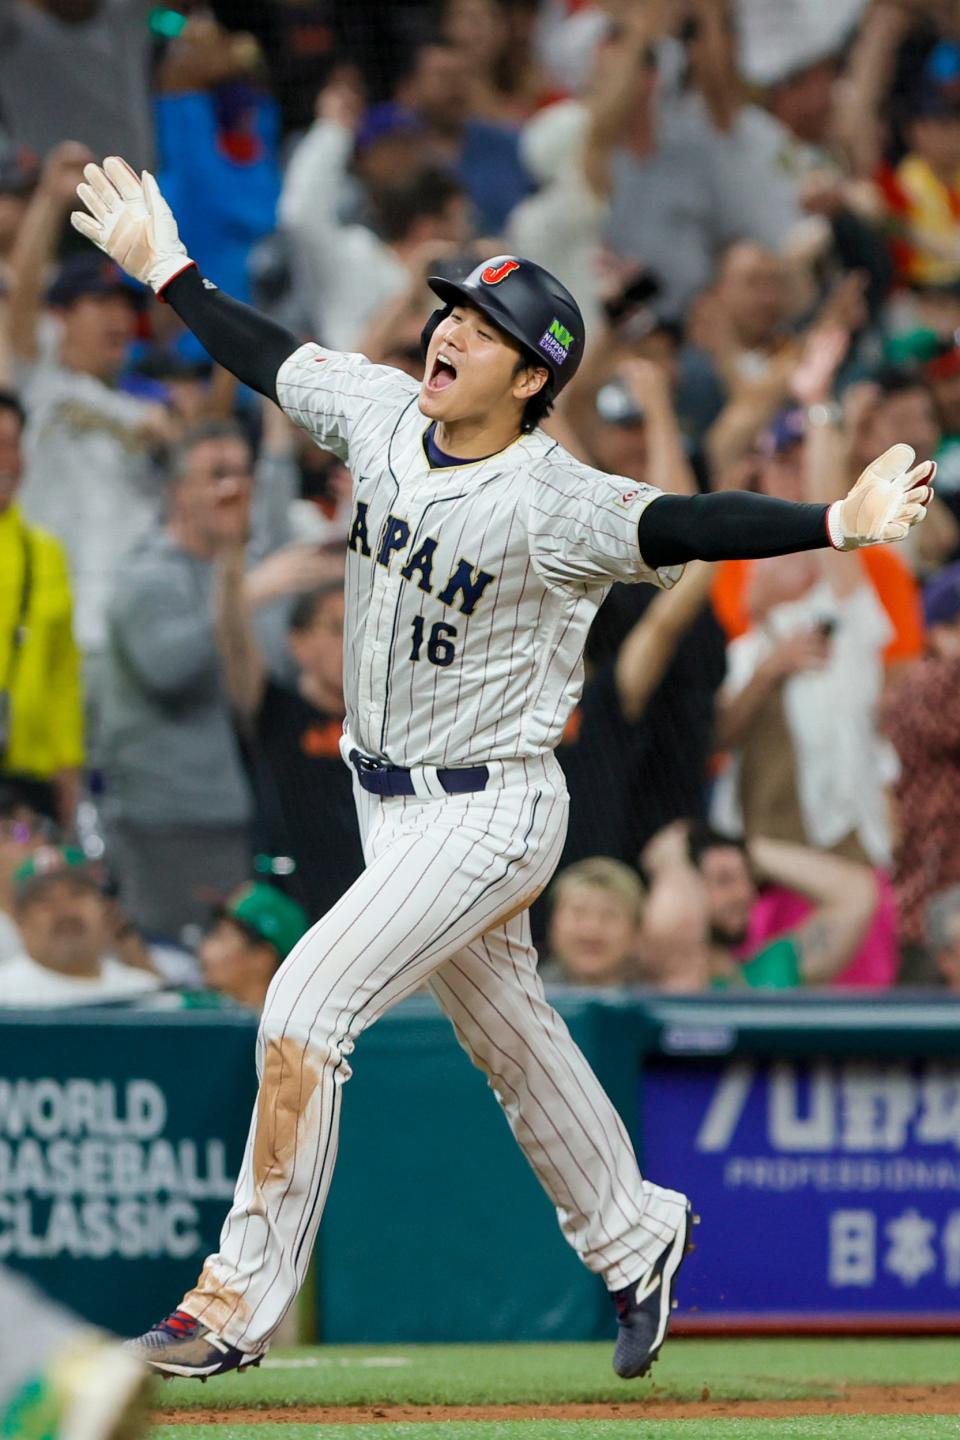 Shohei Ohtani circles the bases after a three-run home run by Red Sox outfielder Masataka Yoshida against Mexico.